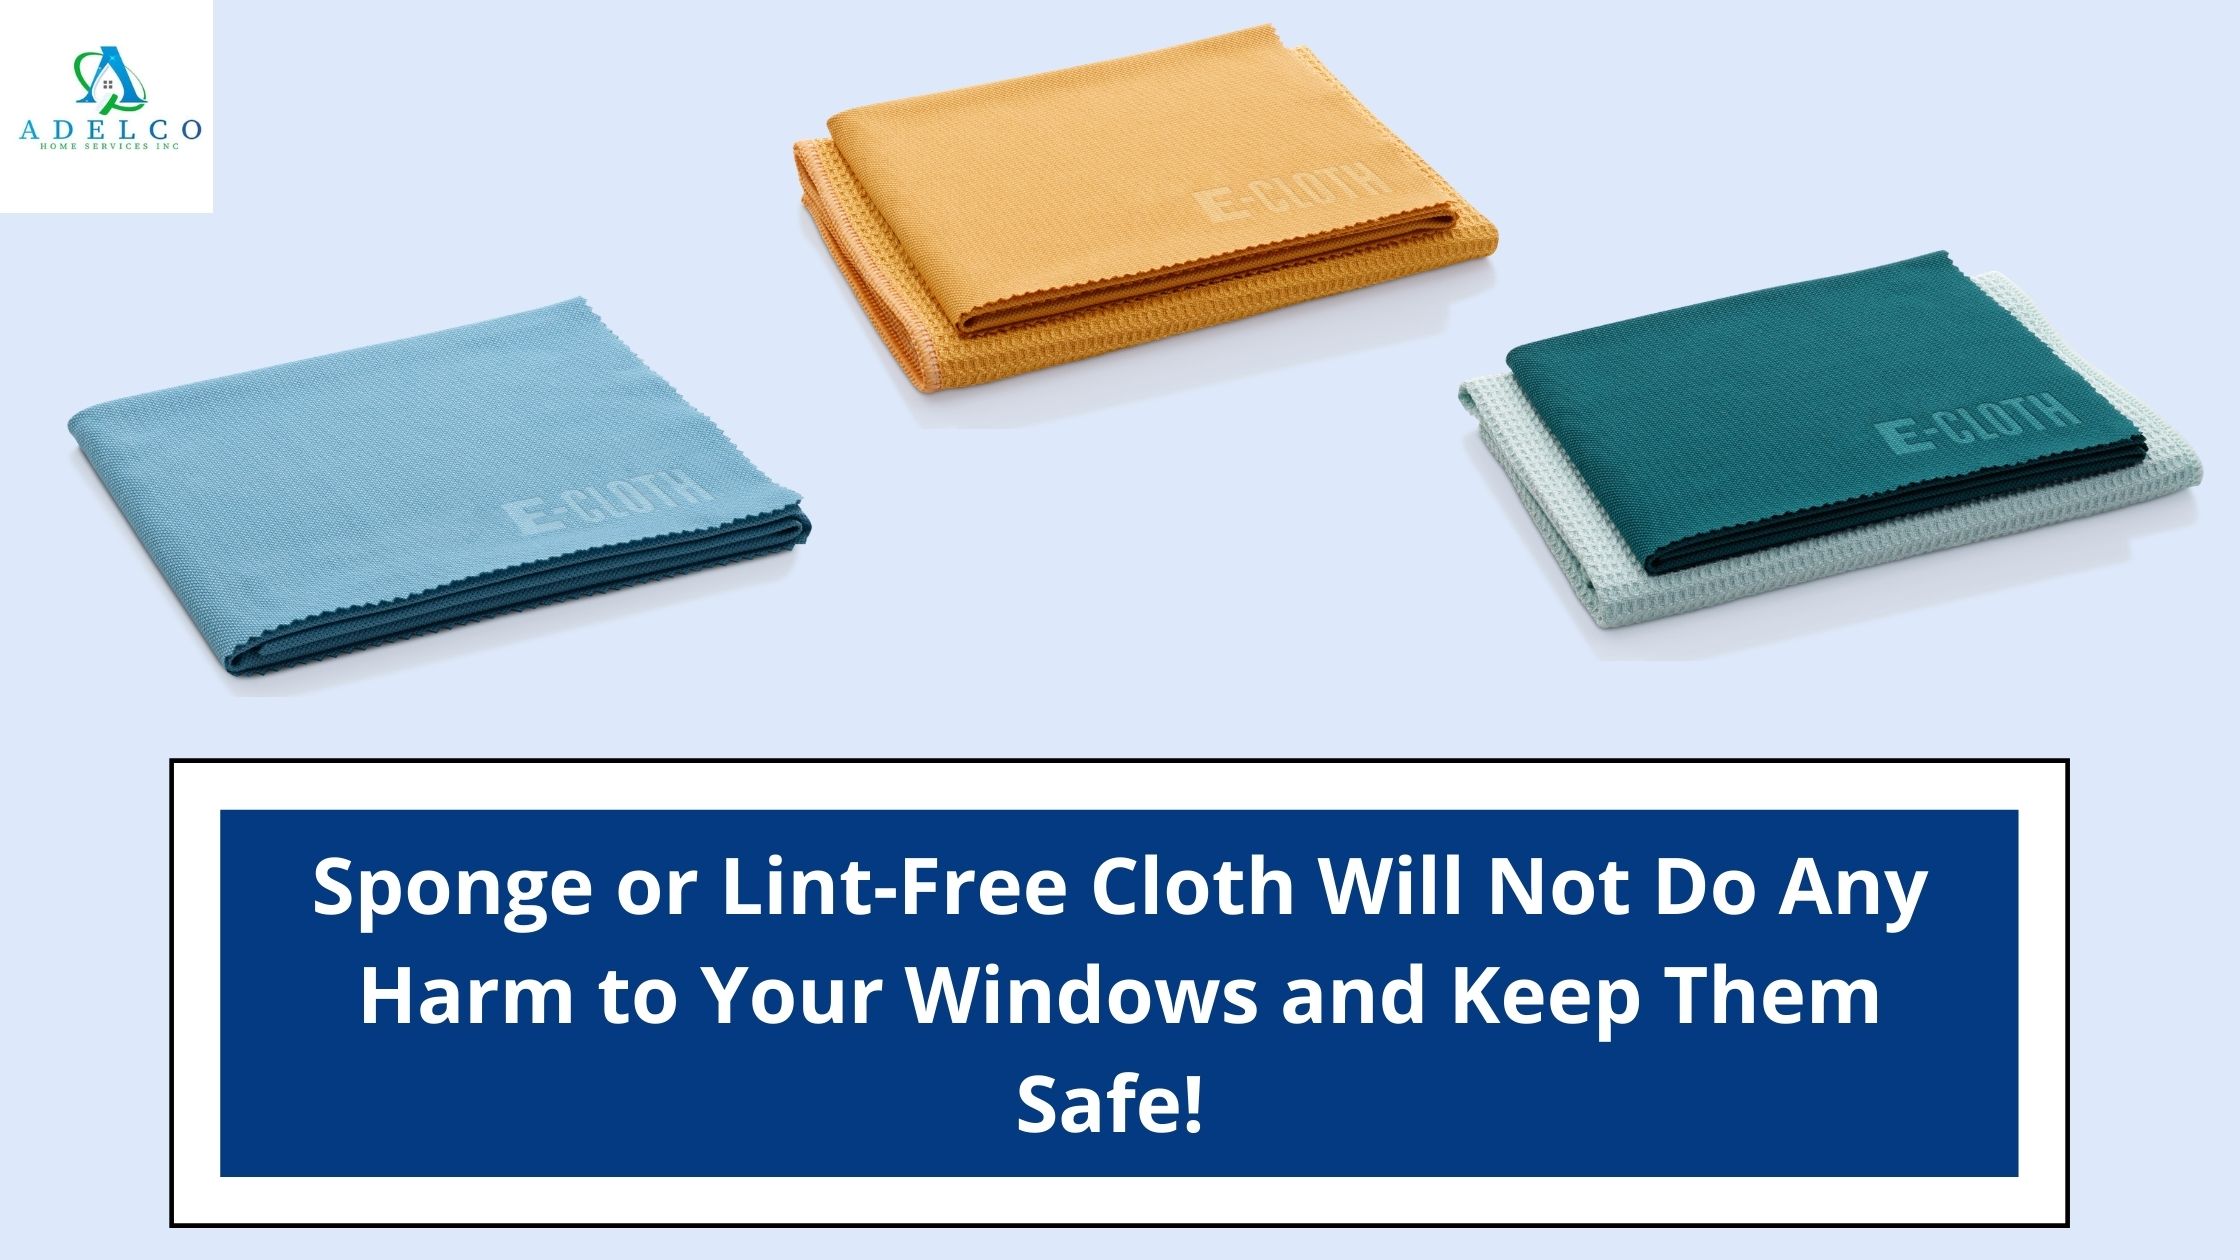 Make Use of Sponge or Lint-Free Cloth to Wet the Window